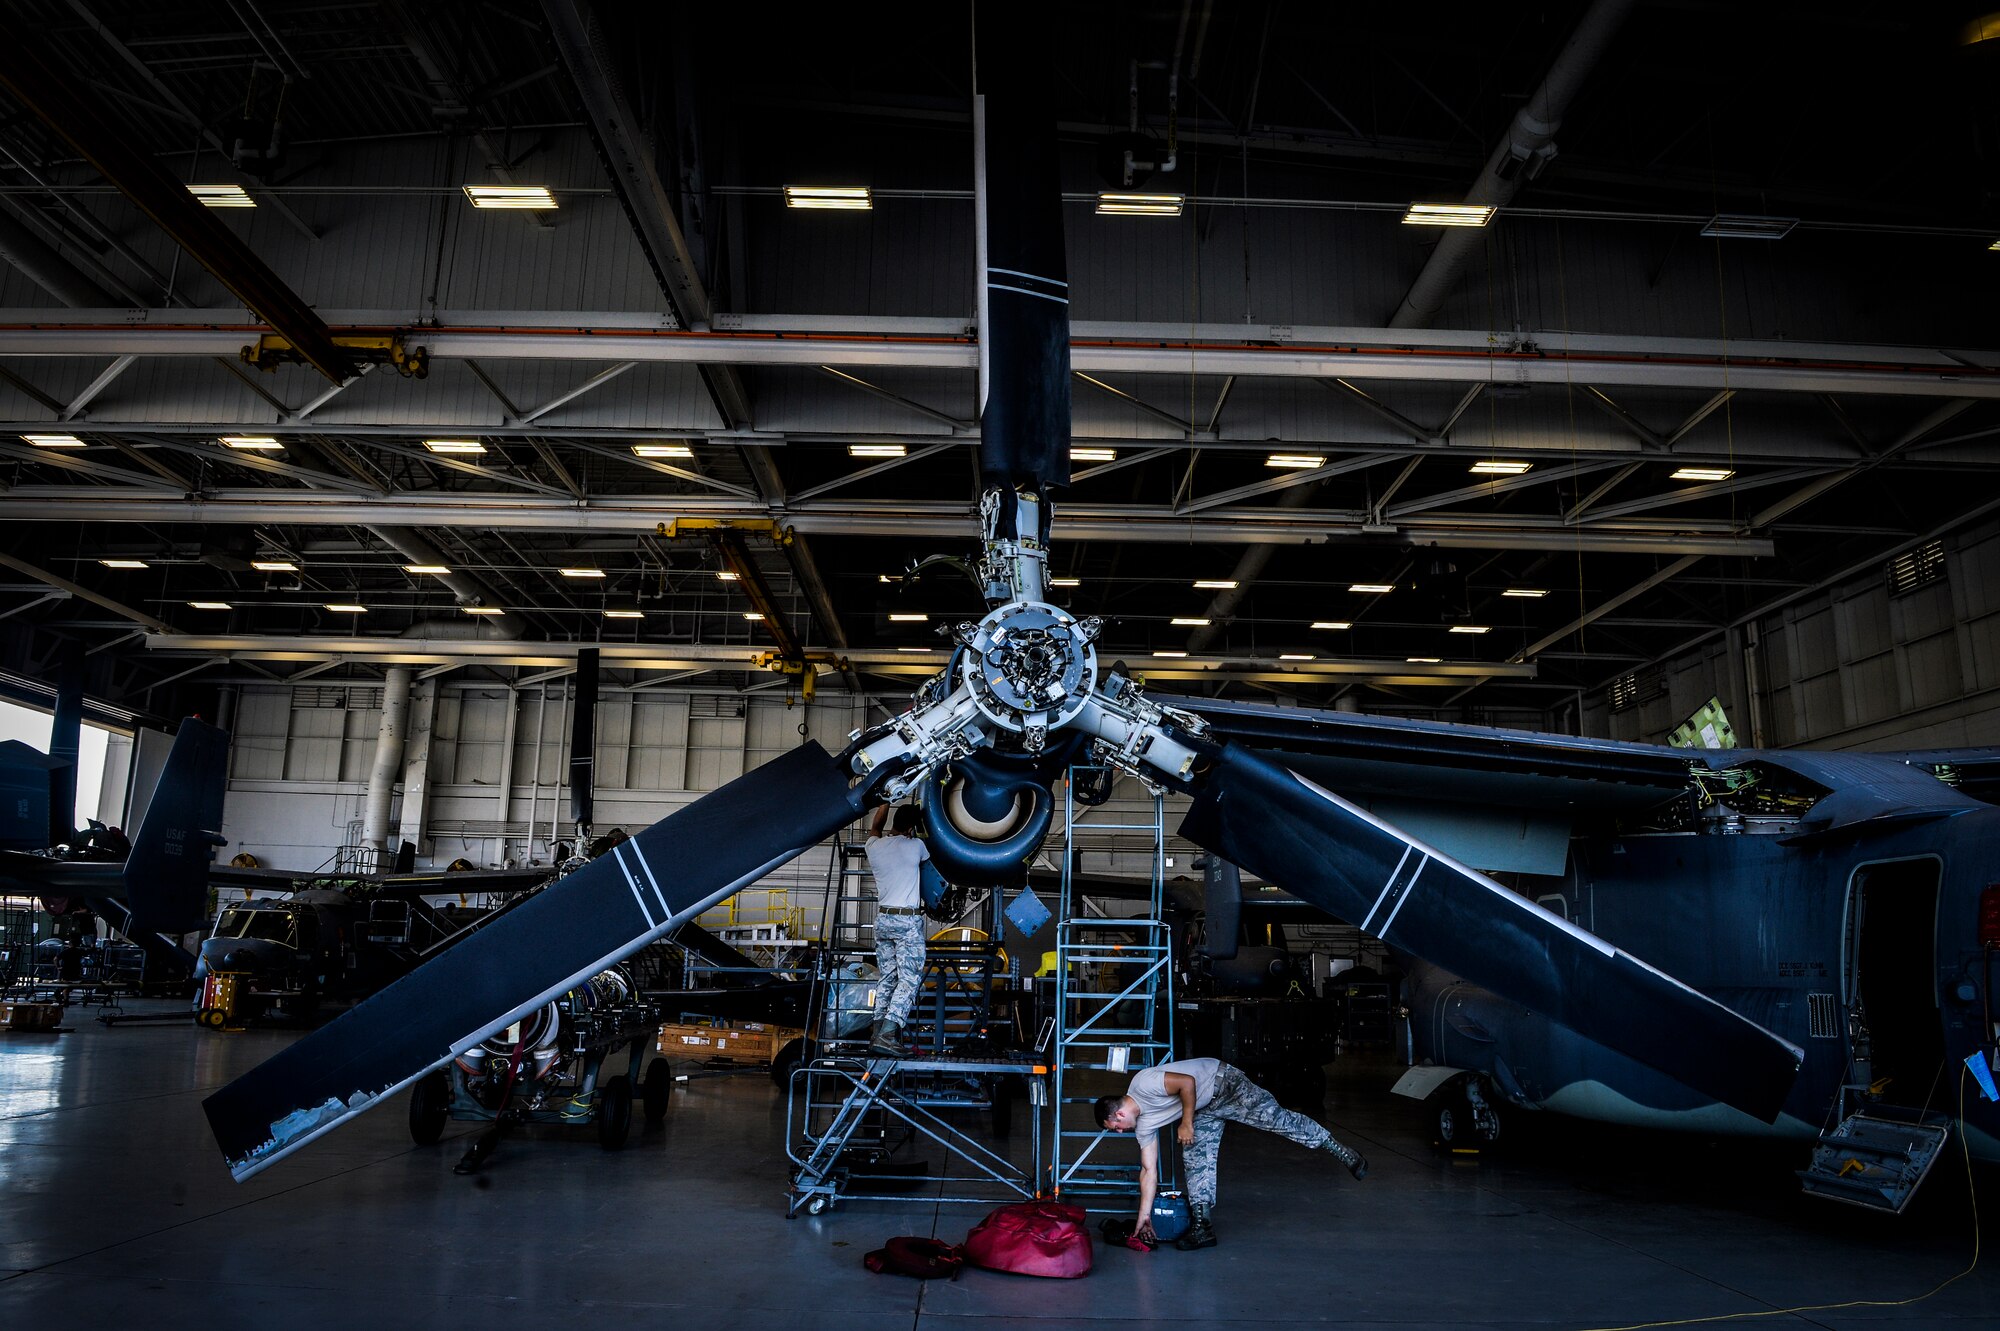 Airmen from the 801st Special Operations Aircraft Maintenance Squadron work on a CV-22 Osprey on Hurlburt Field, Fla., Aug. 8, 2014. The Osprey is a tilt-rotor aircraft, which allows it to hover and take off vertically in addition to transferring to high-speed horizontal flight. (U.S. Air Force photo/Senior Airman Christopher Callaway) 